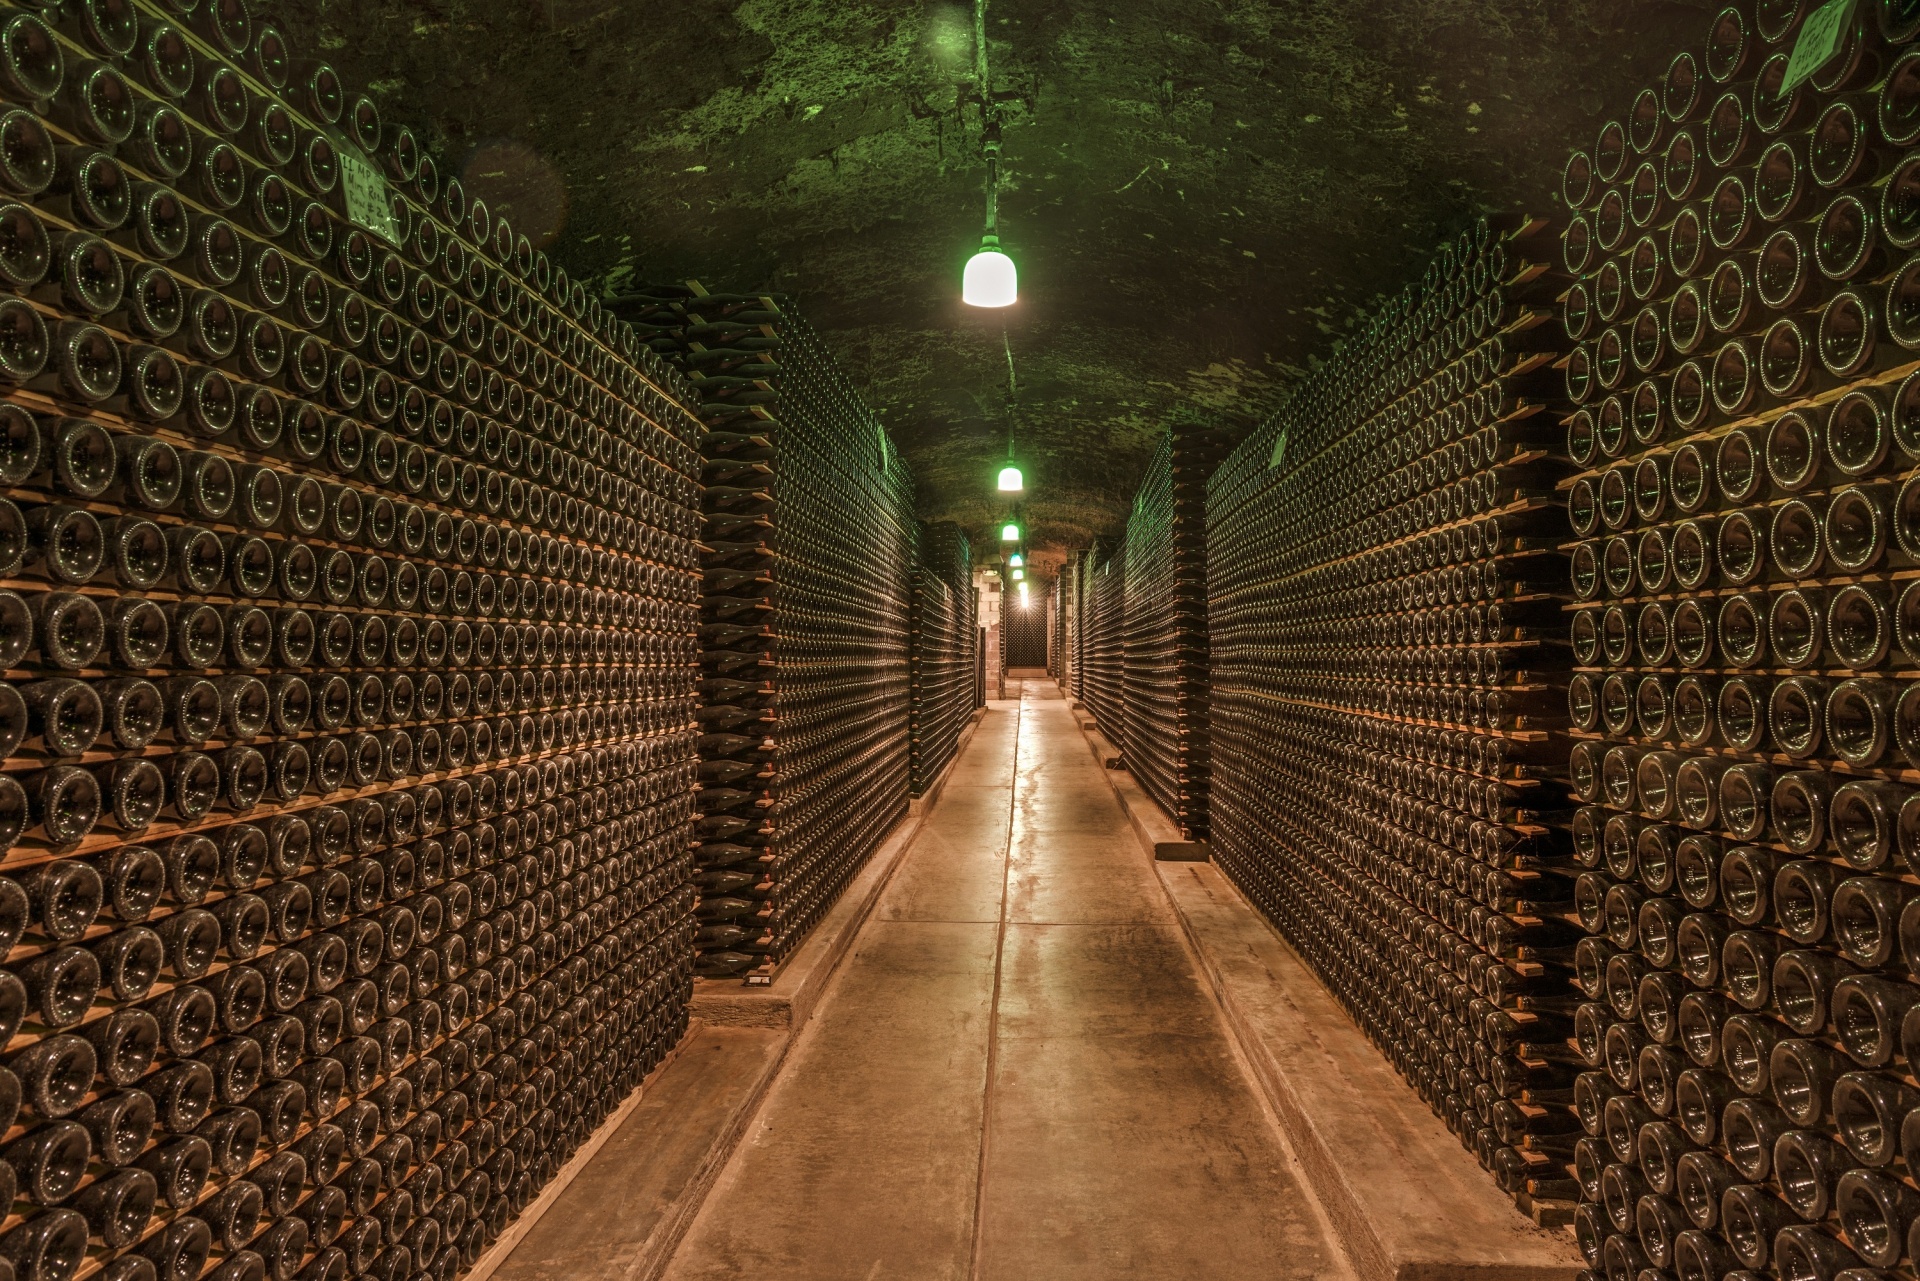 Collection of bottles of wine in the wine cellar